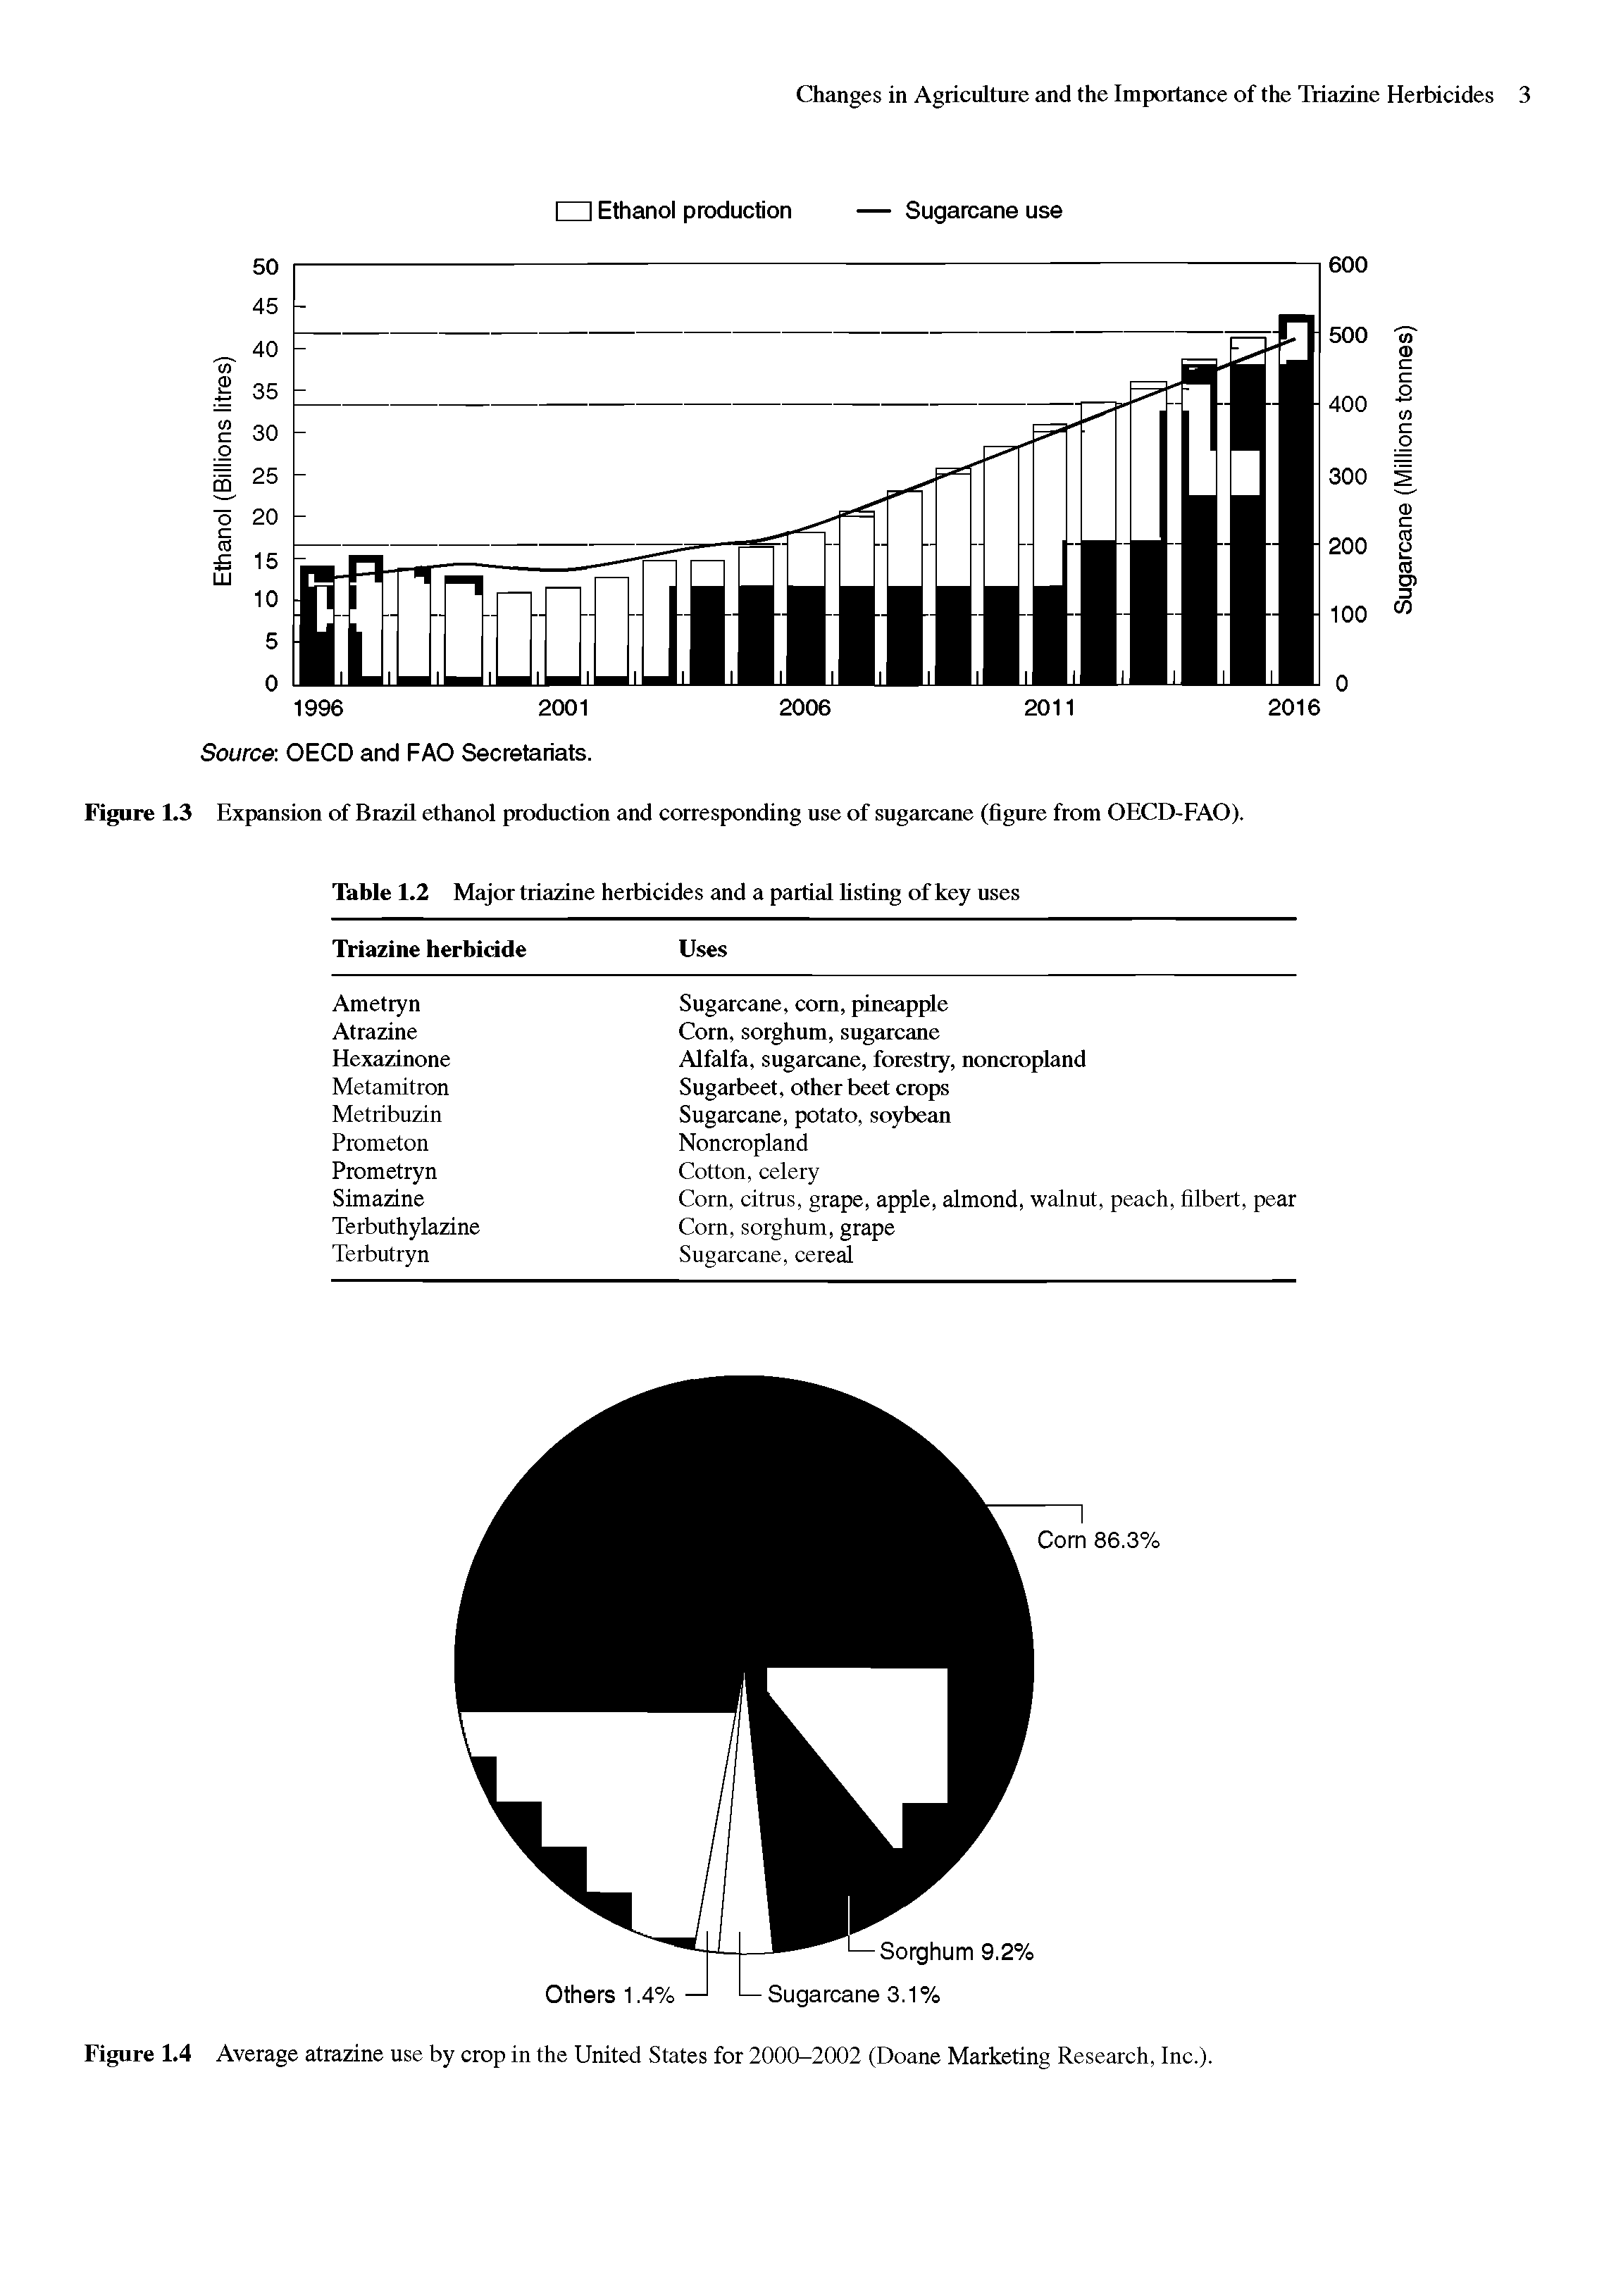 Figure 1.4 Average atrazine use by crop in the United States for 2000-2002 (Doane Marketing Research, Inc.).